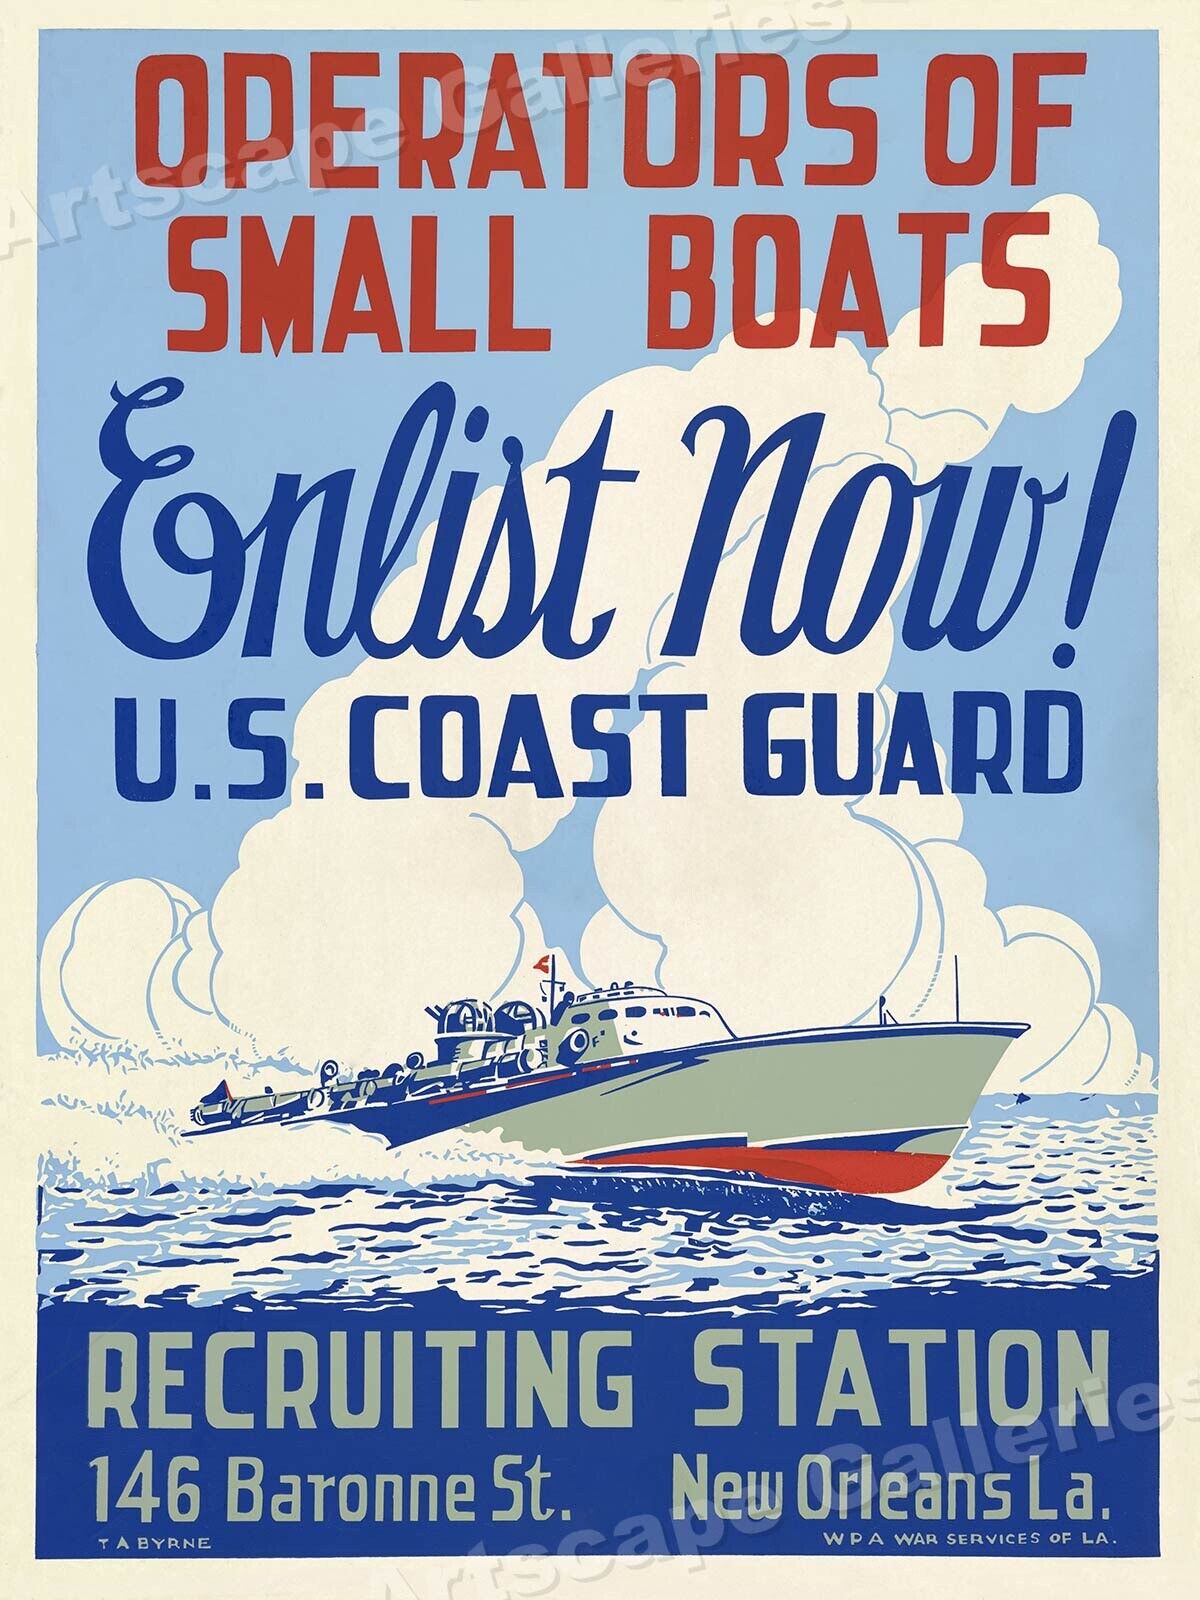 Enlist in the US Coast Guard - WW2 Home Front Recruiting Poster - 18x24